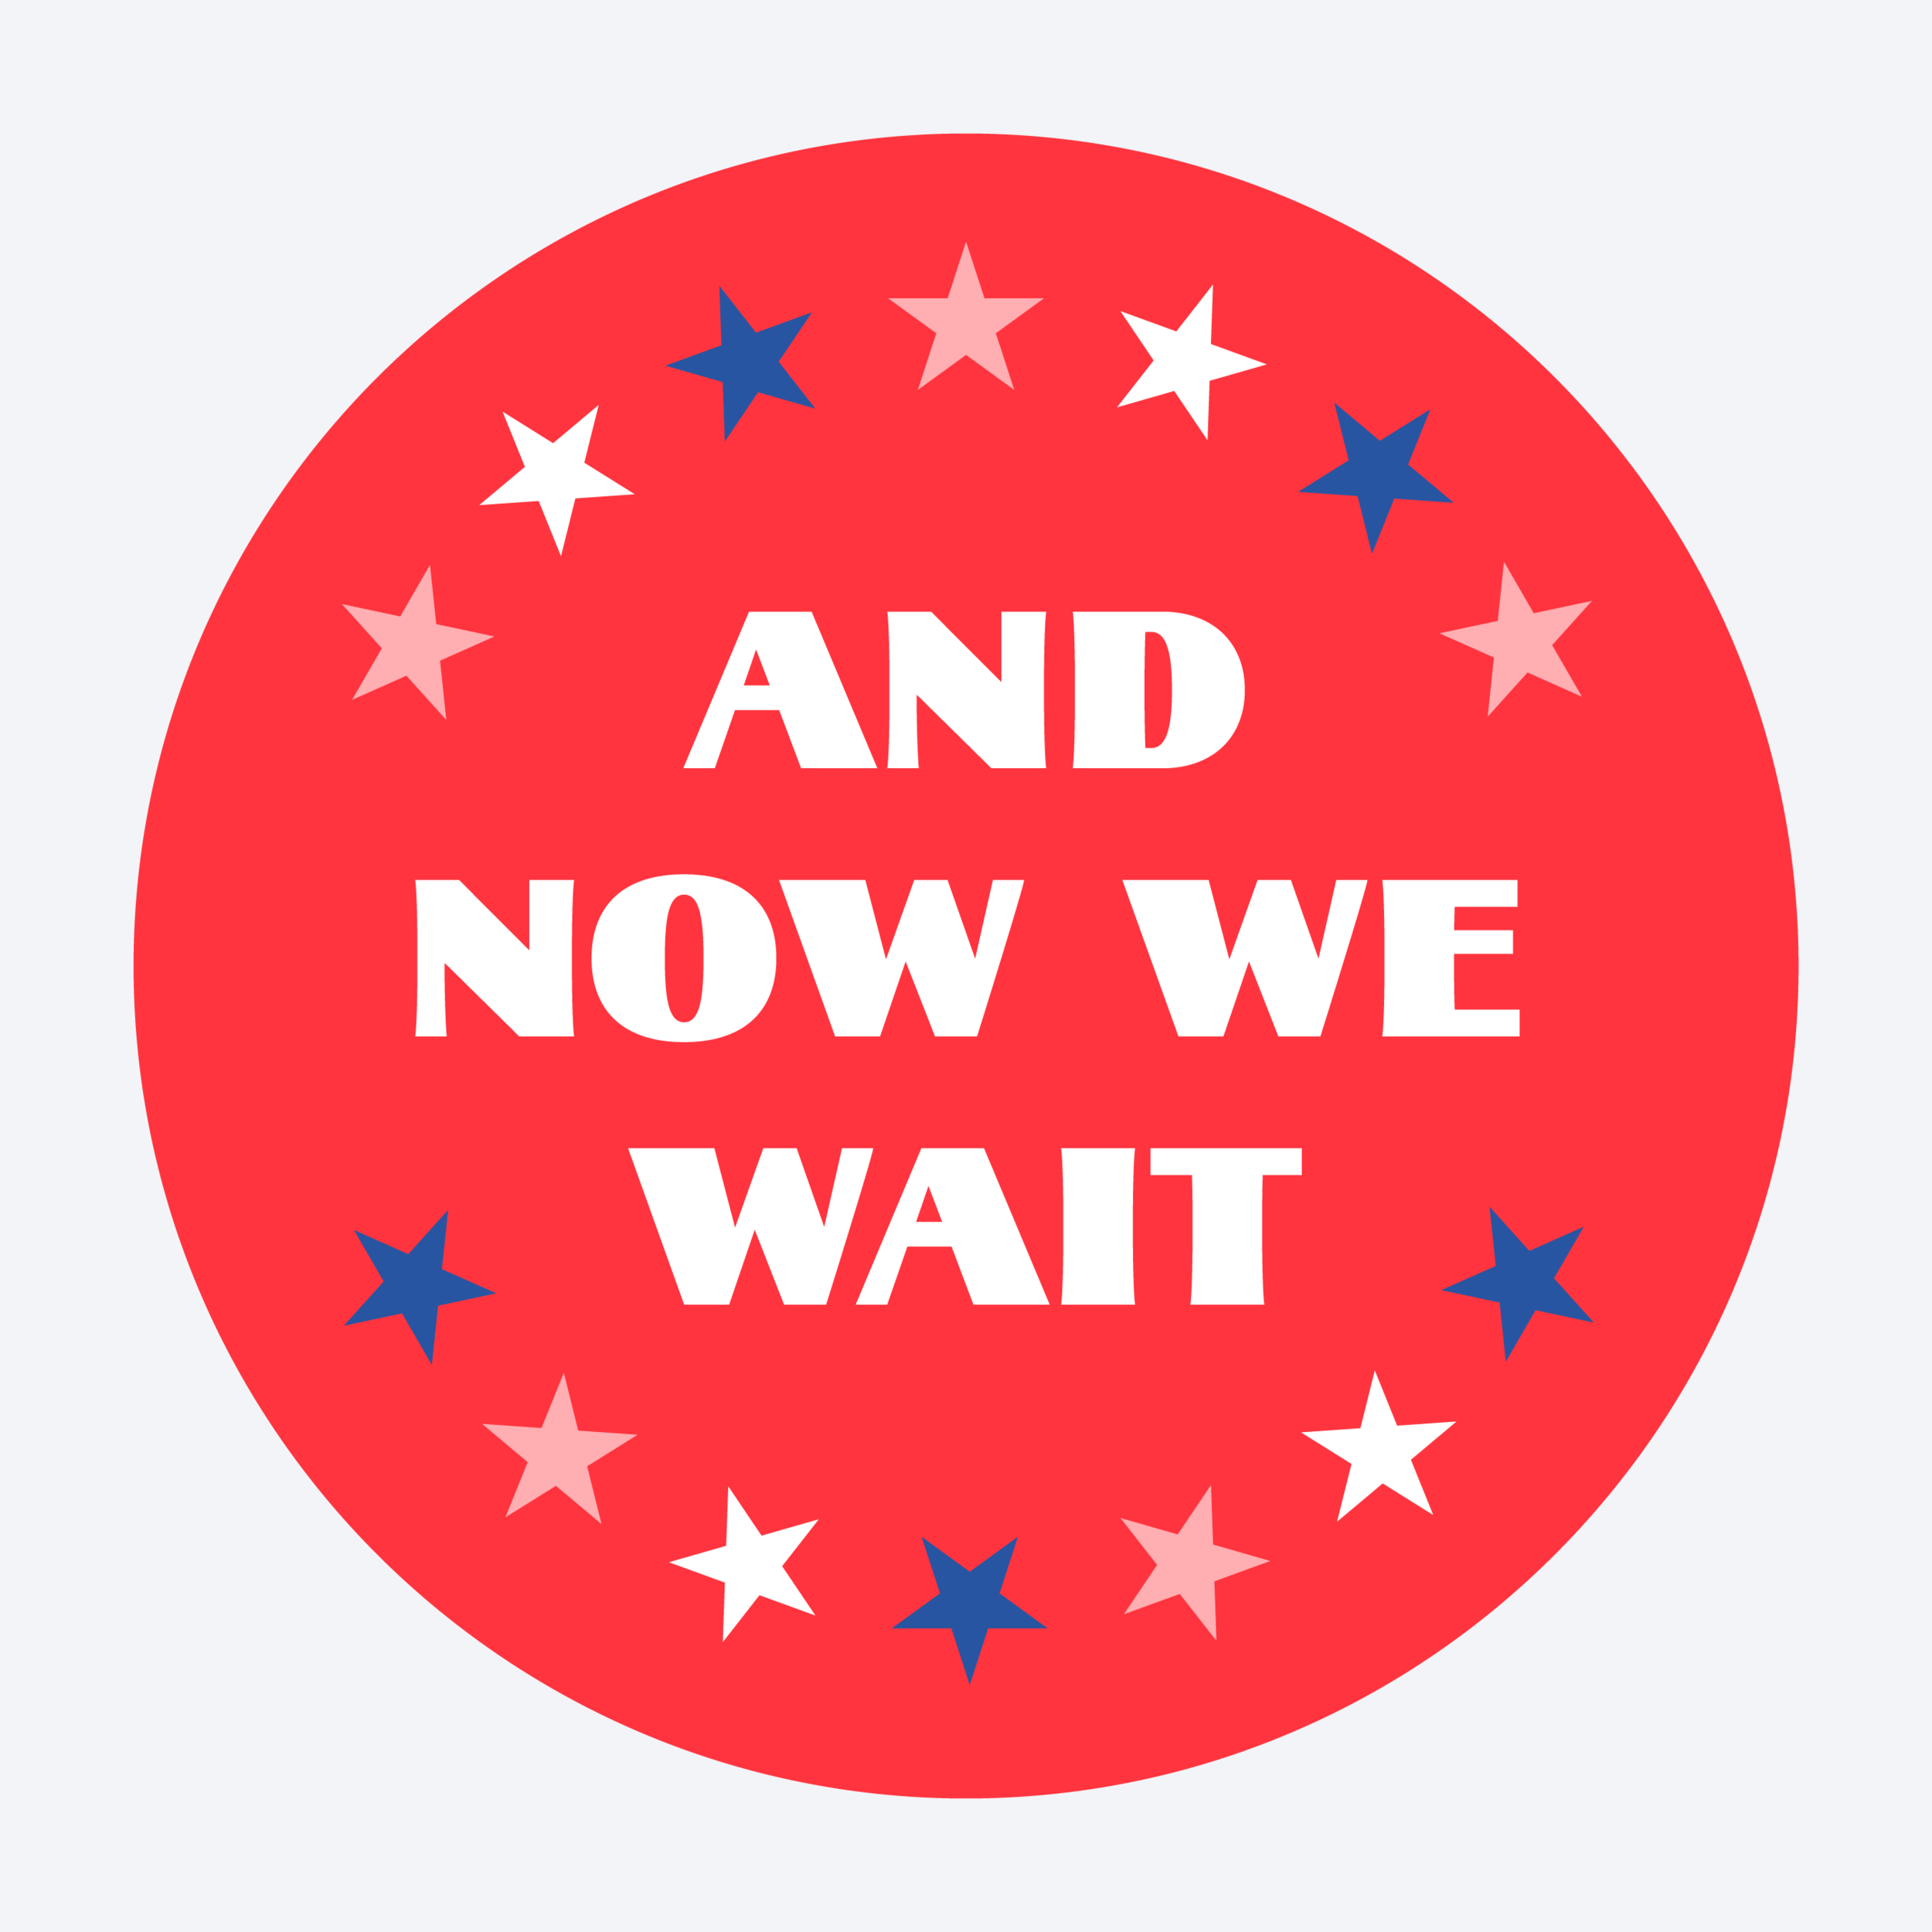 WeVoted-Stickers_Artboard 1 copy 7.png